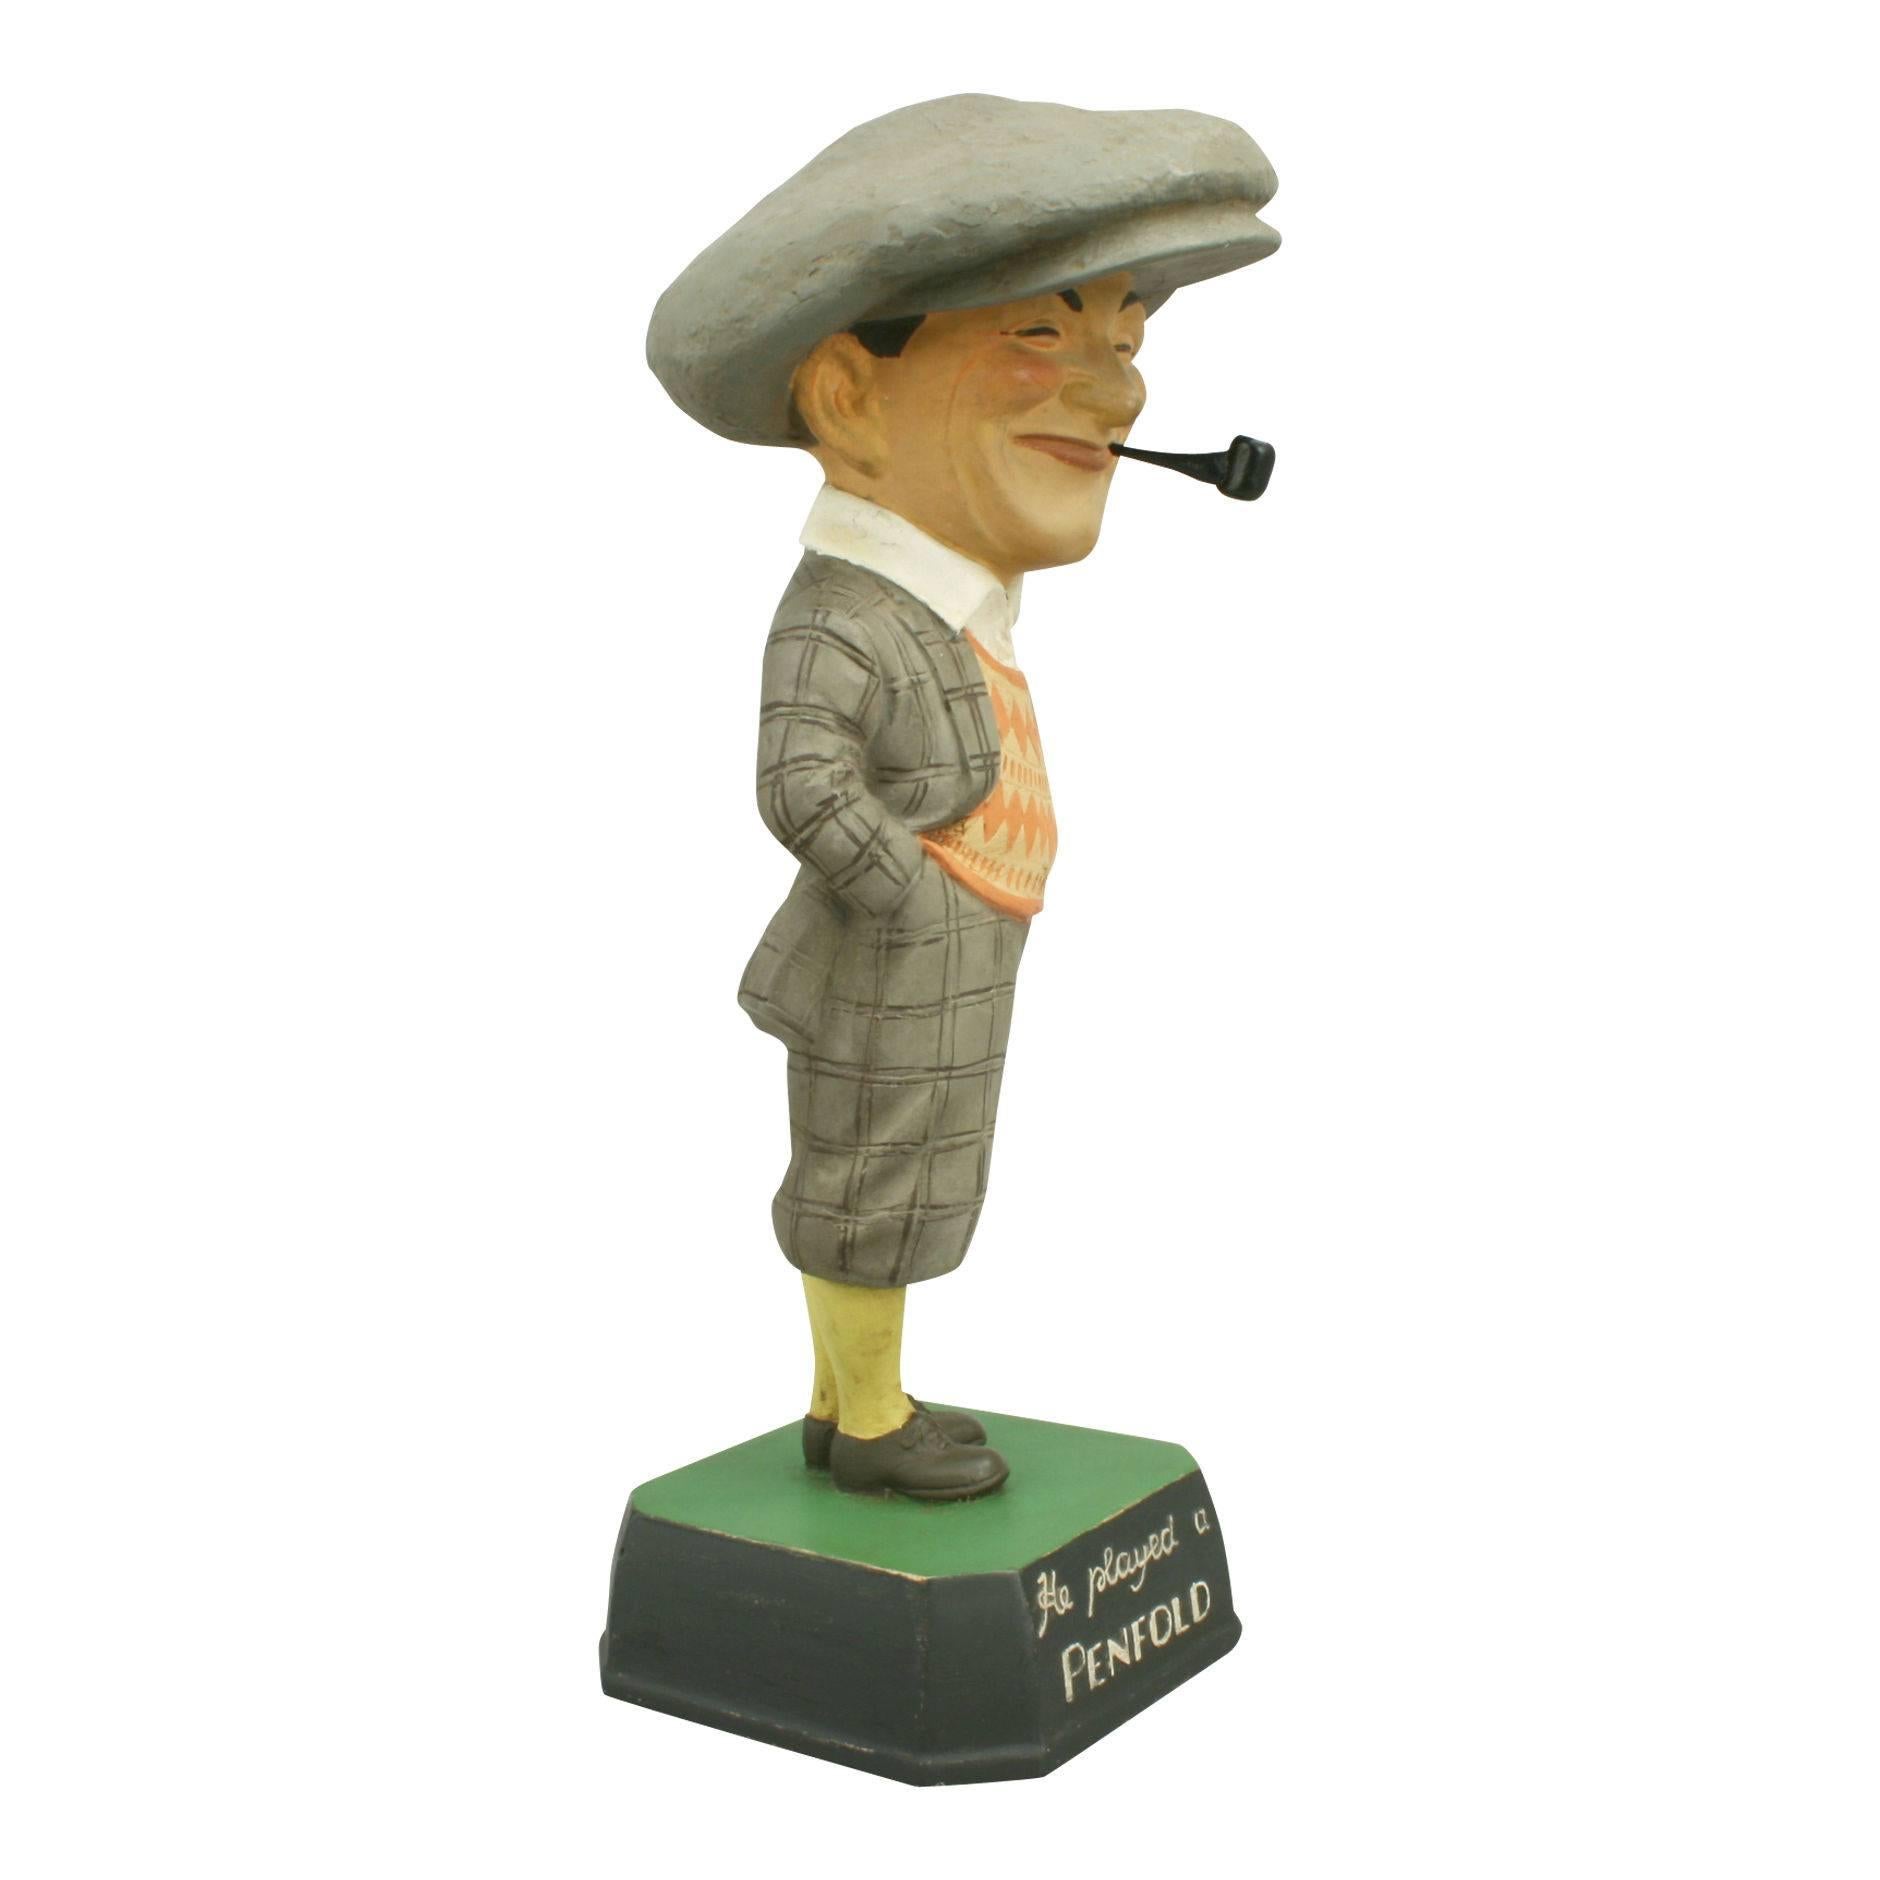 Antique advertising penfold man. Golf figure.
A colorful plaster advertising figure with an oversized cap on a base with the slogan: He played a Penfold. There are some marks to the paint work, otherwise a well restored piece. The figure would have